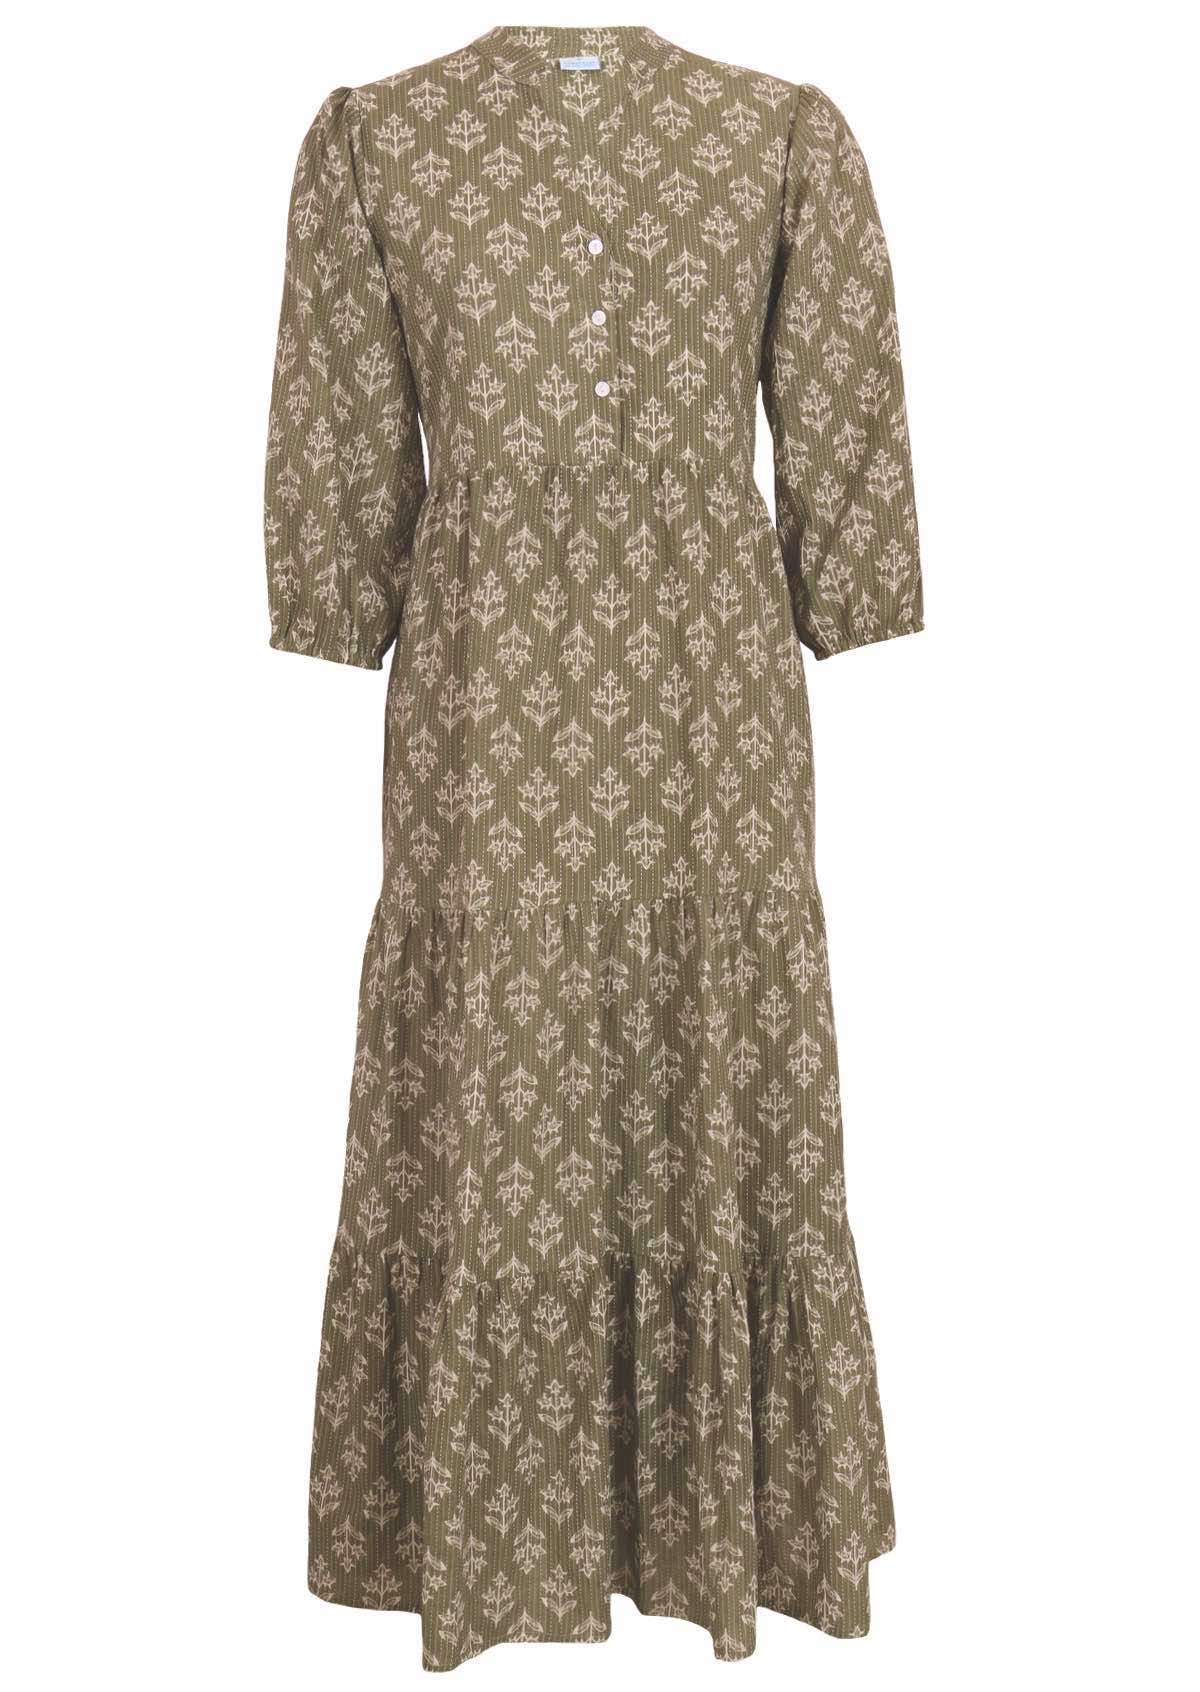 Cotton maxi dress with buttoned bodice and 3/4 sleeves